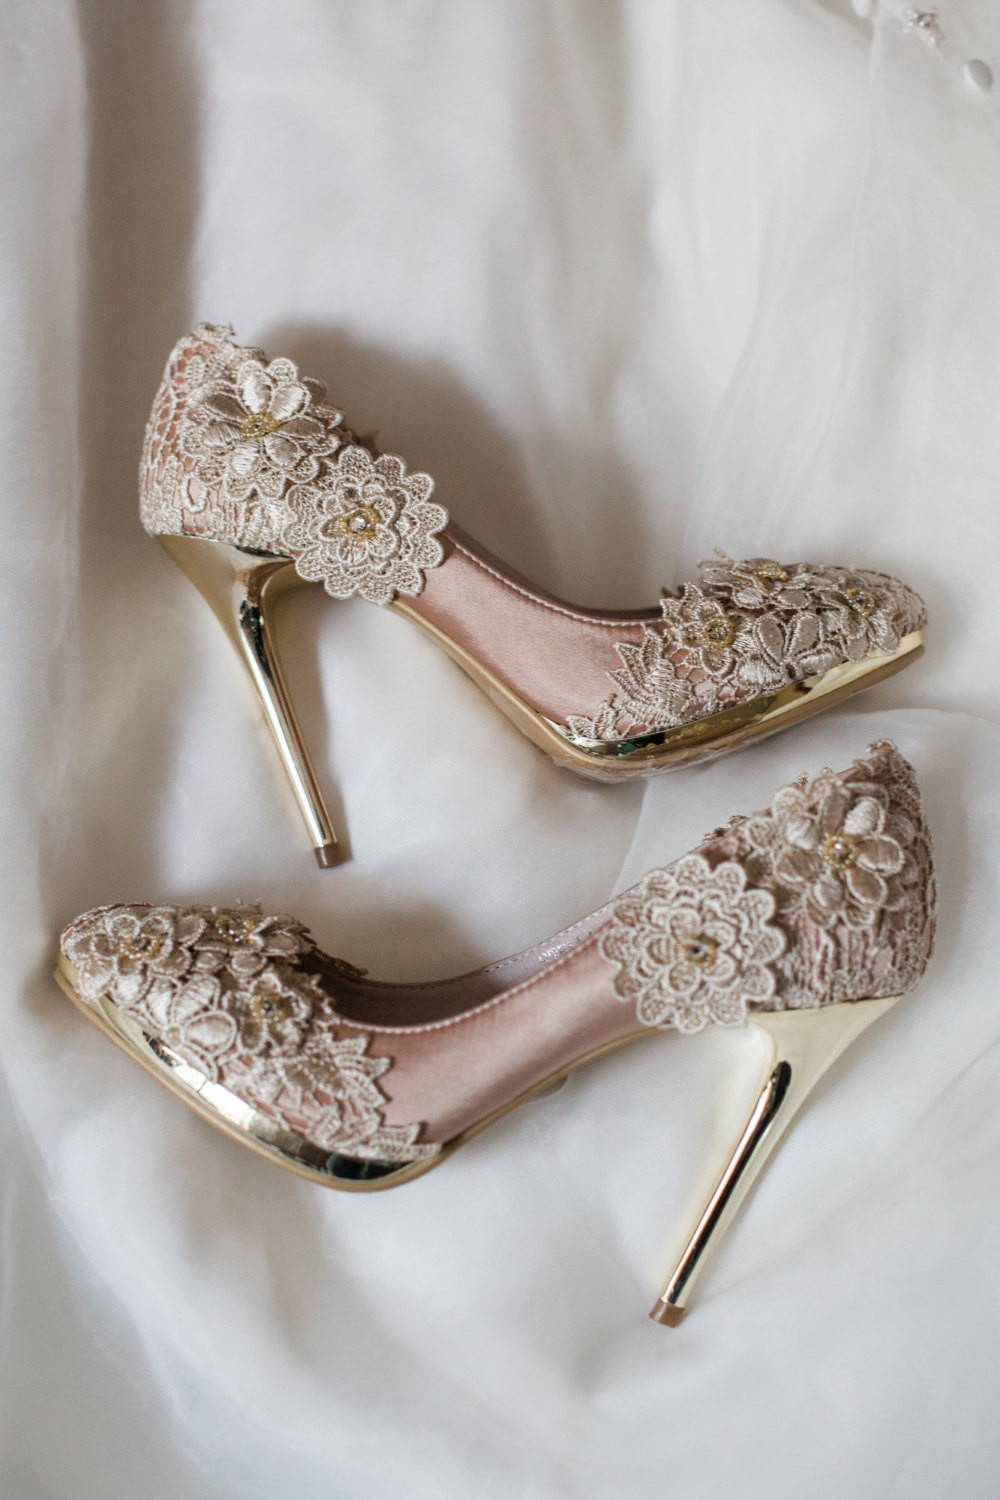 Vintage Lace Wedding Shoes
 SALE Vintage Flower Lace Wedding Shoes with Champagne Gold